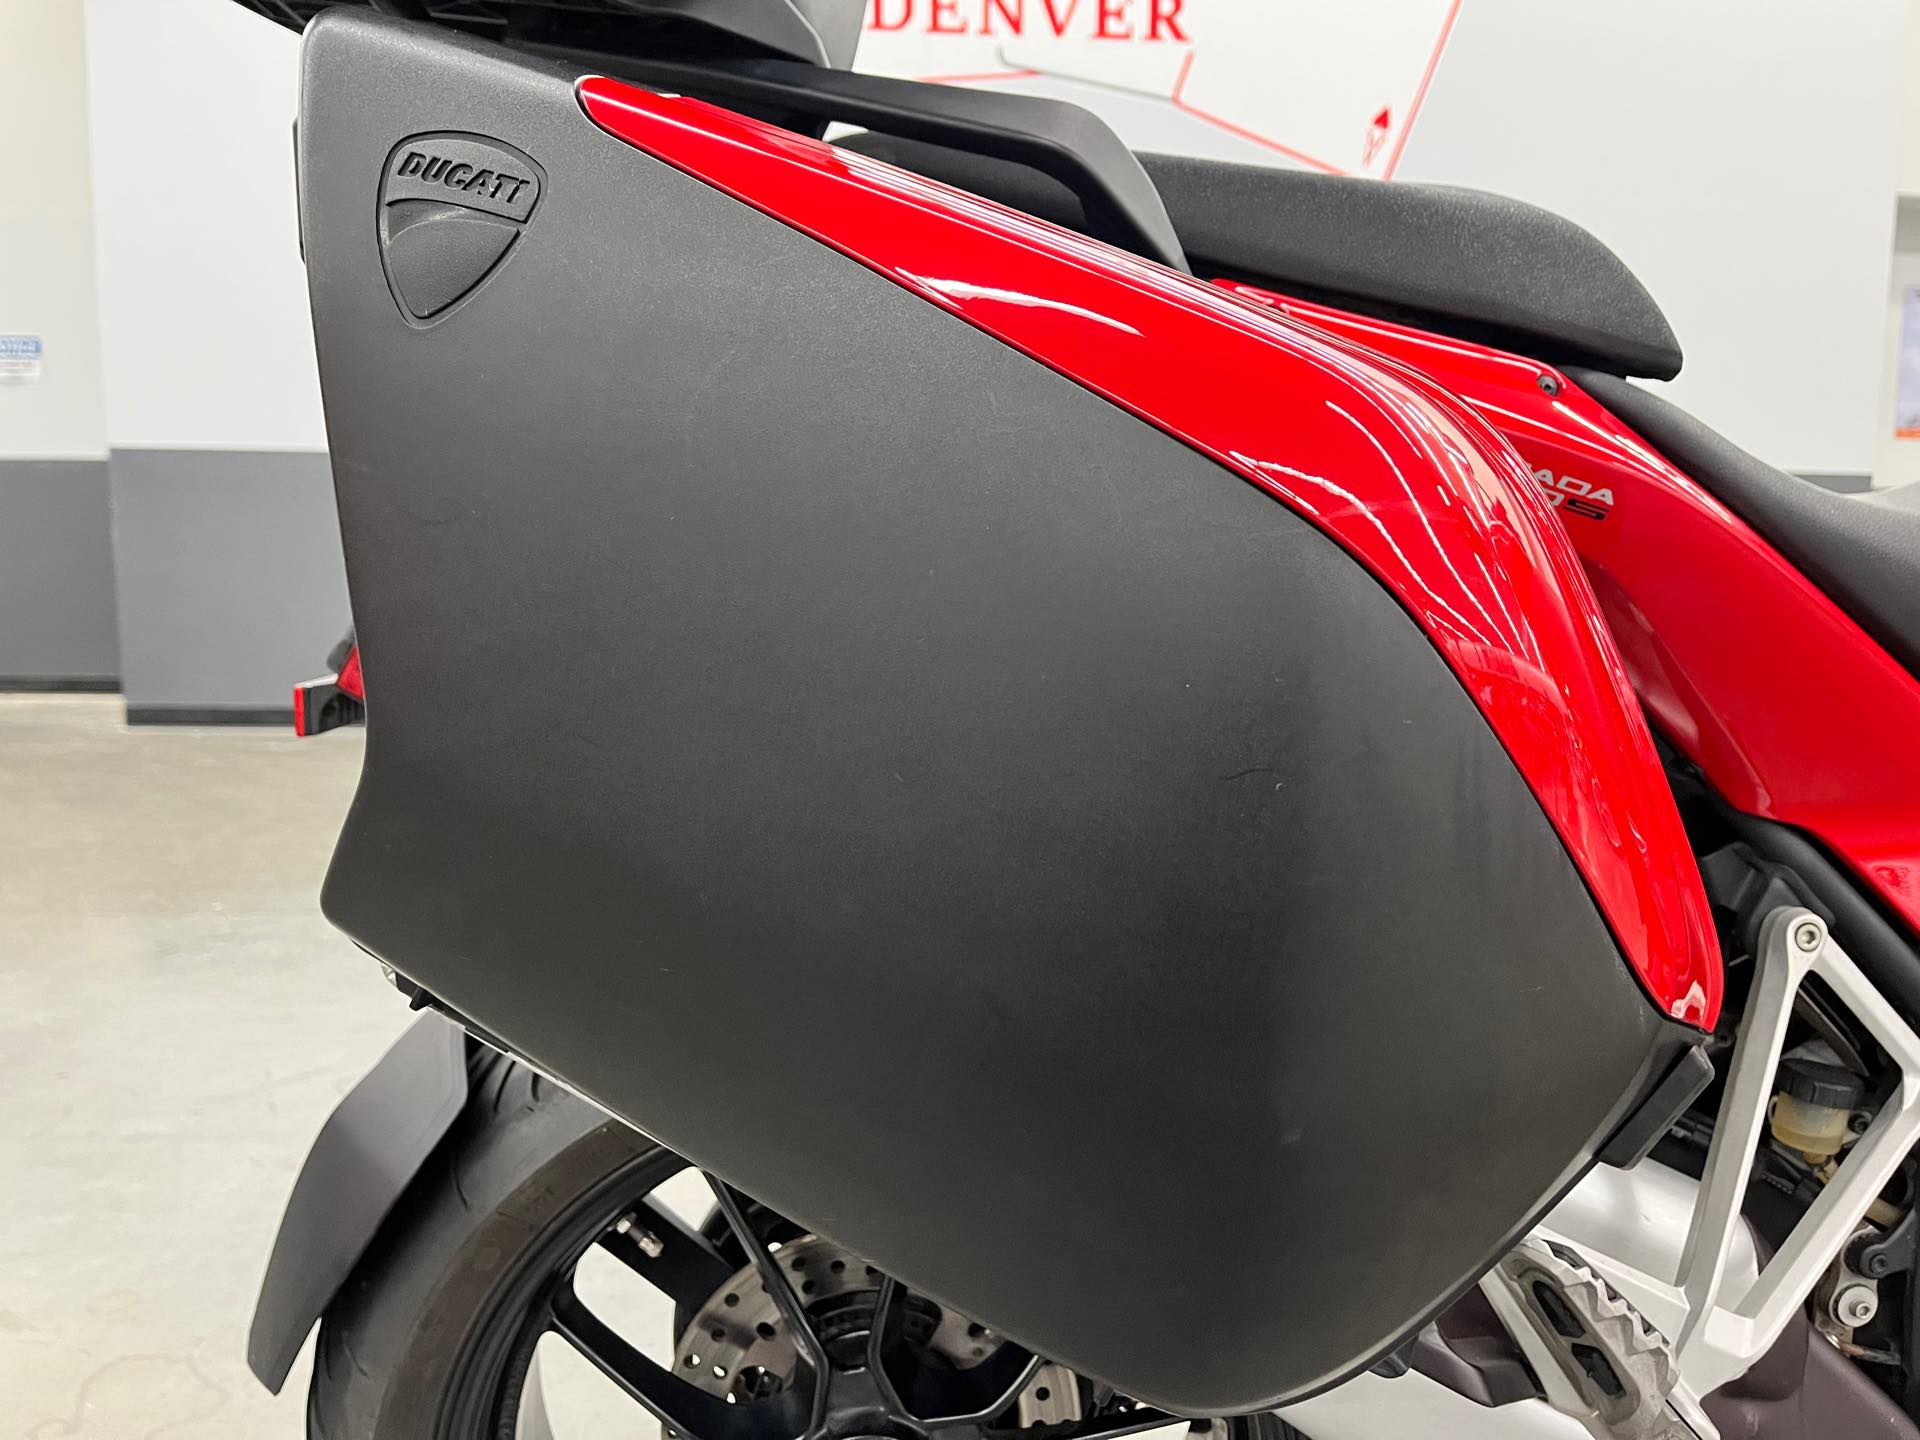 2010 Ducati Multistrada 1200 S Touring Edition at Aces Motorcycles - Denver